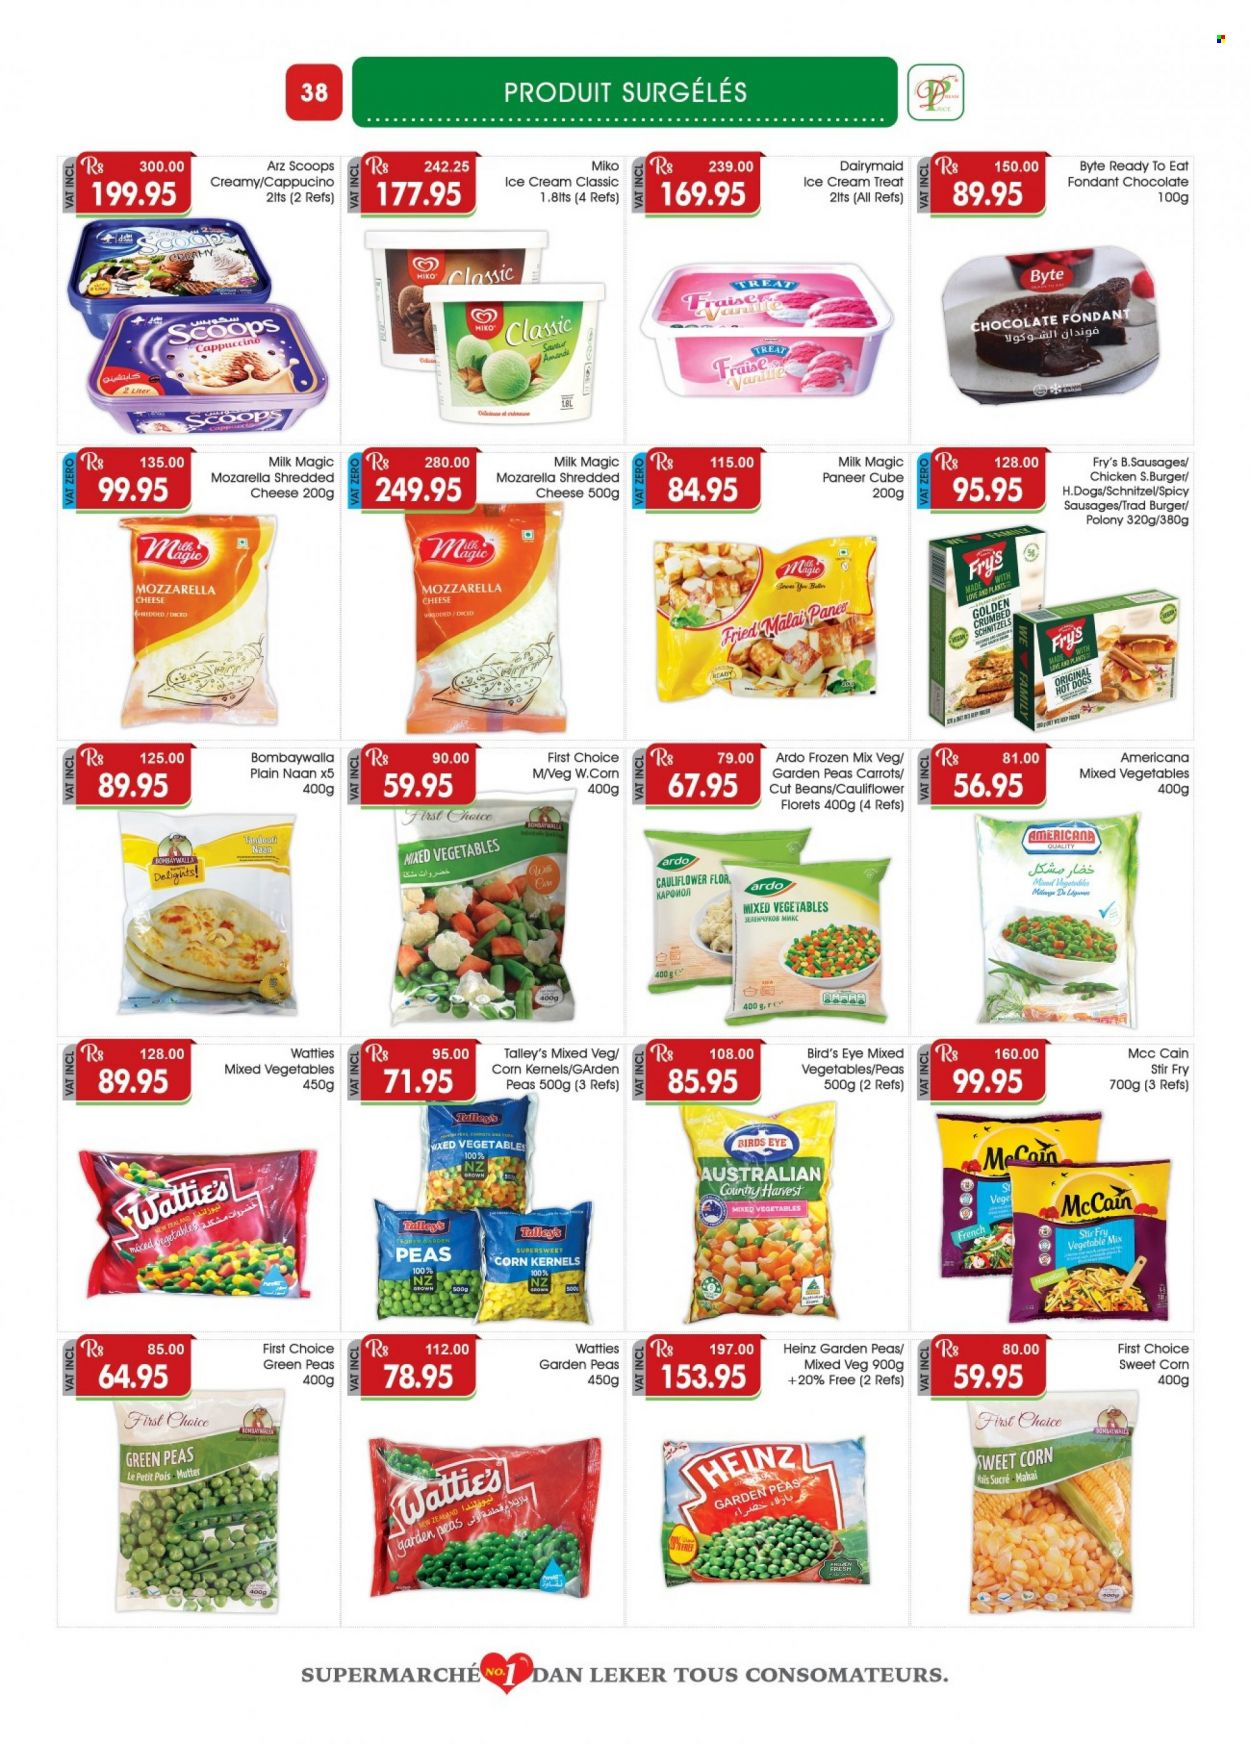 thumbnail - Dreamprice Catalogue - 17.03.2023 - 10.04.2023 - Sales products - beans, carrots, cauliflower, corn, peas, sweet corn, hot dog, hamburger, schnitzel, Bird's Eye, Wattie's, polony, sausage, shredded cheese, paneer, milk, ice cream, frozen vegetables, mixed vegetables, Country Harvest, McCain, cappuccino, chicken, cage, mozzarella, Heinz. Page 38.